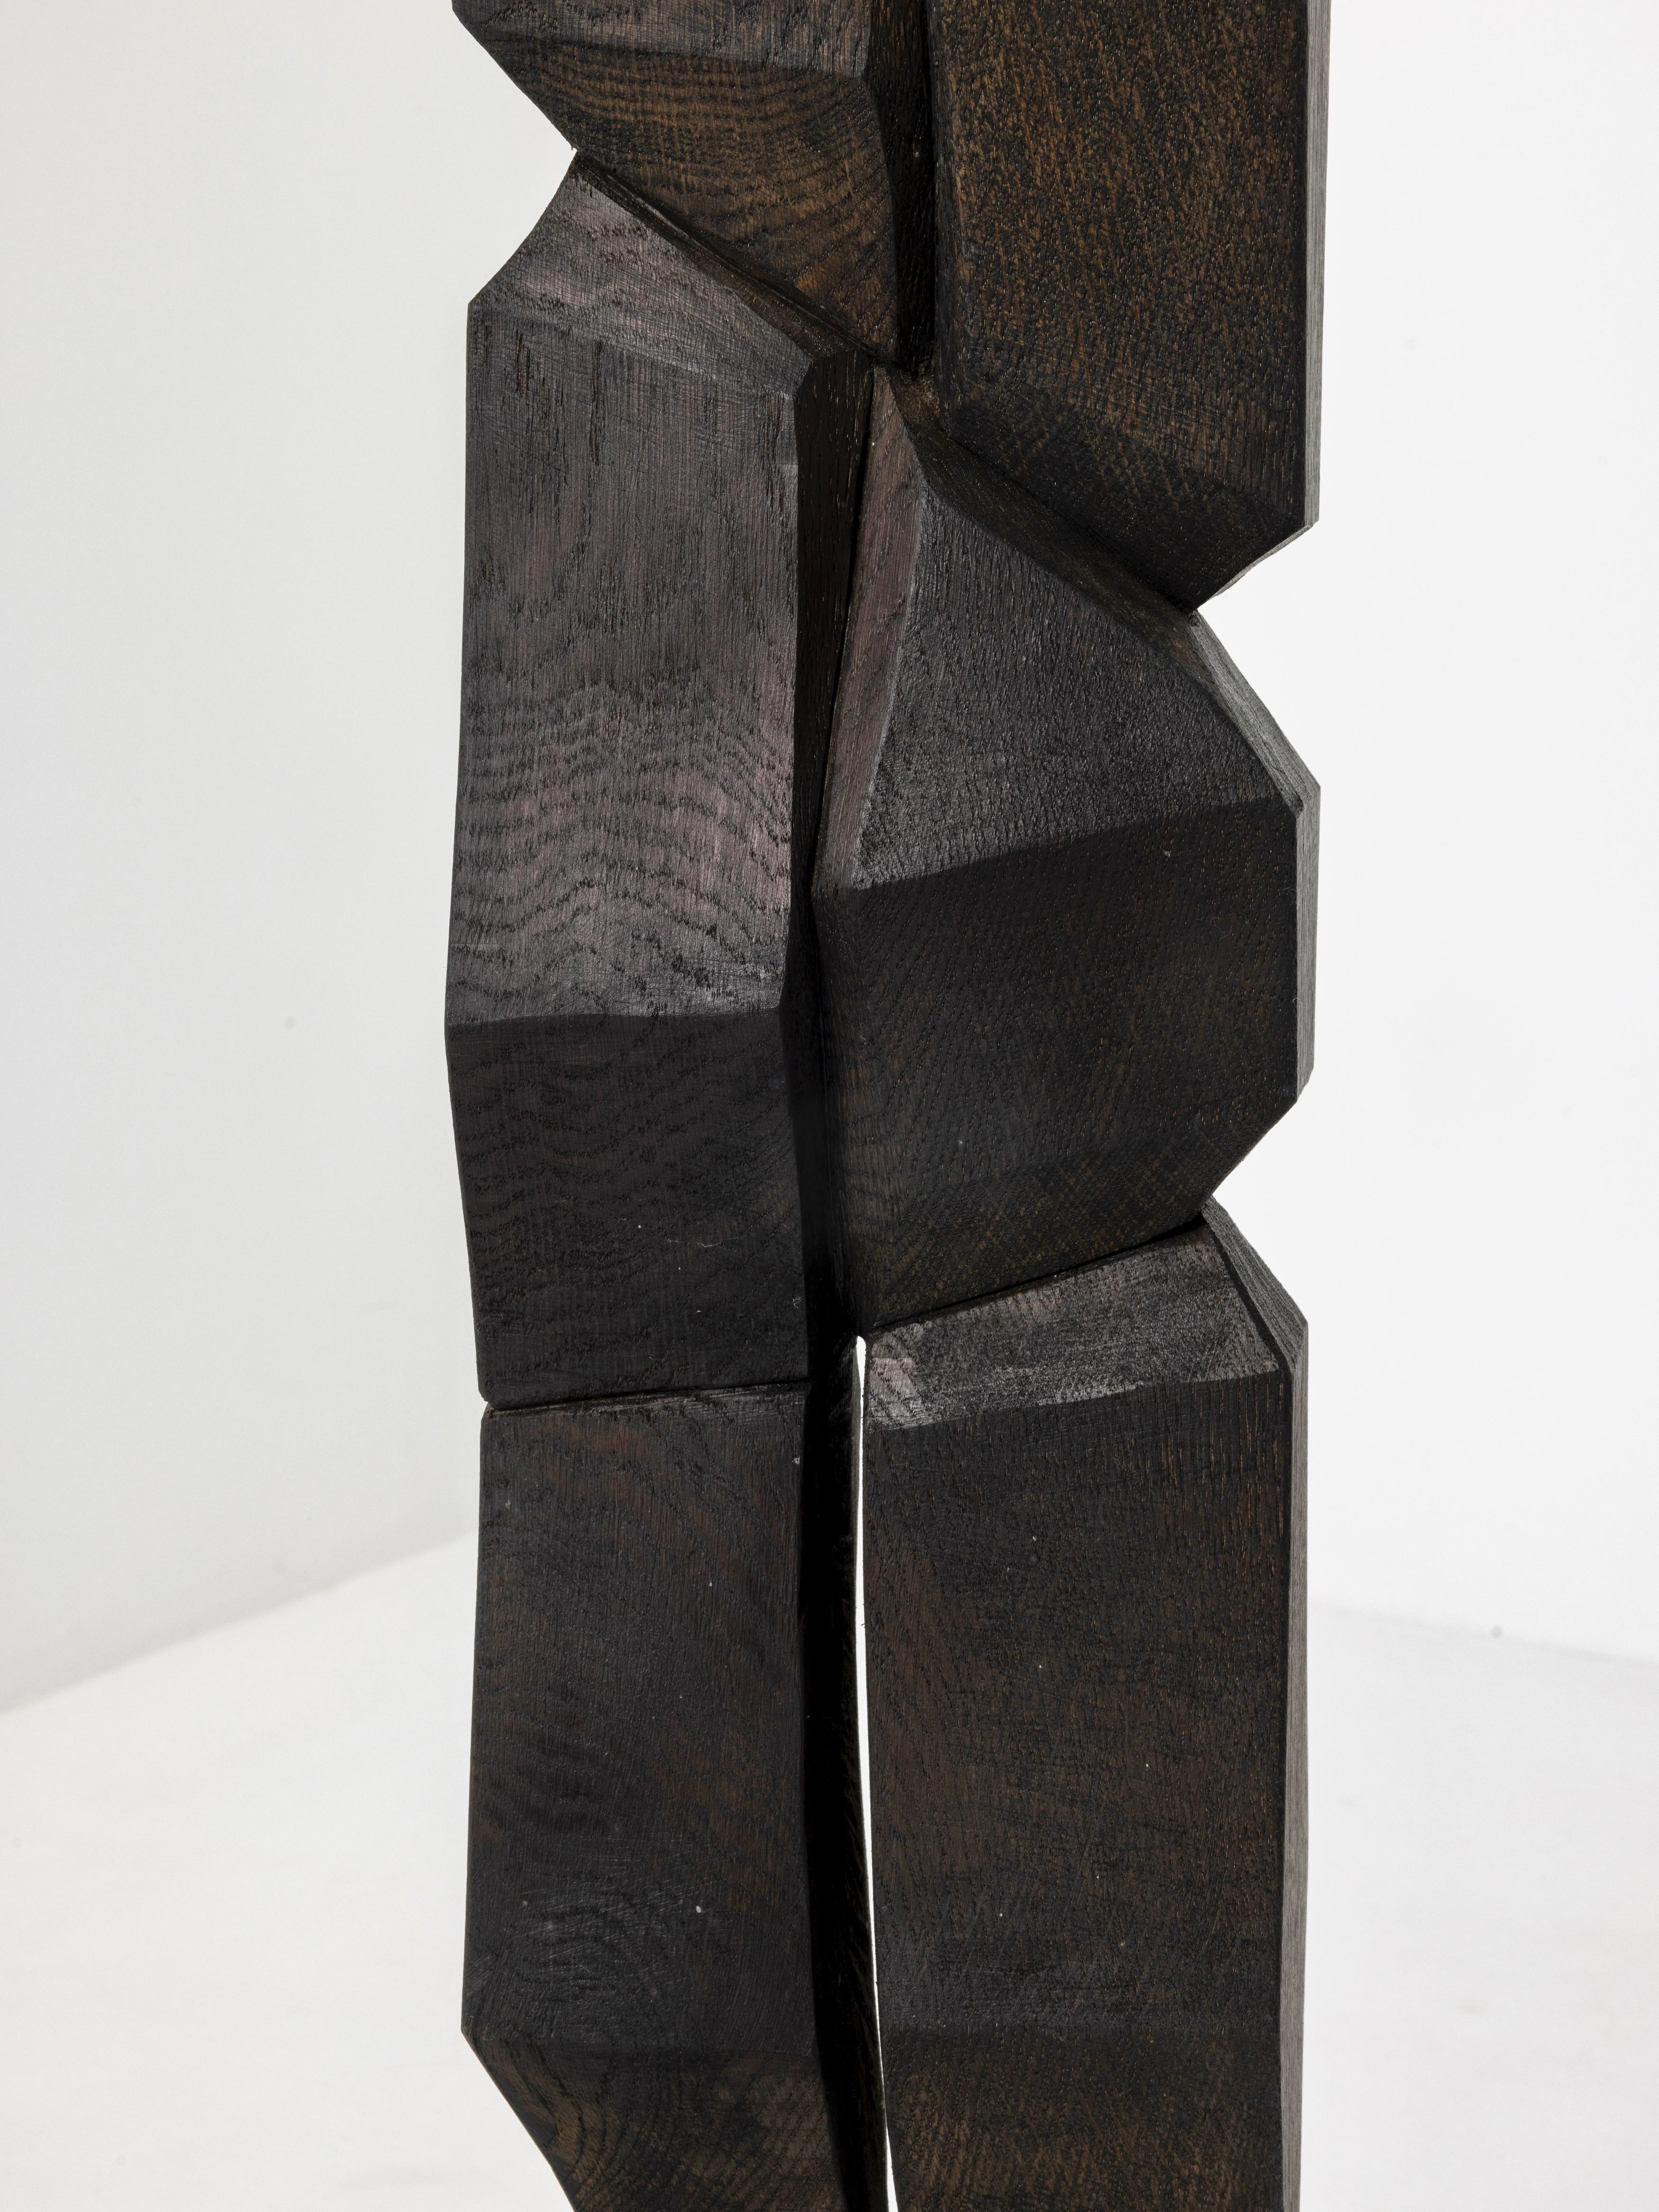 Contemporary Wooden Totem Sculpture by Bertrand Créac'h, France For Sale 2